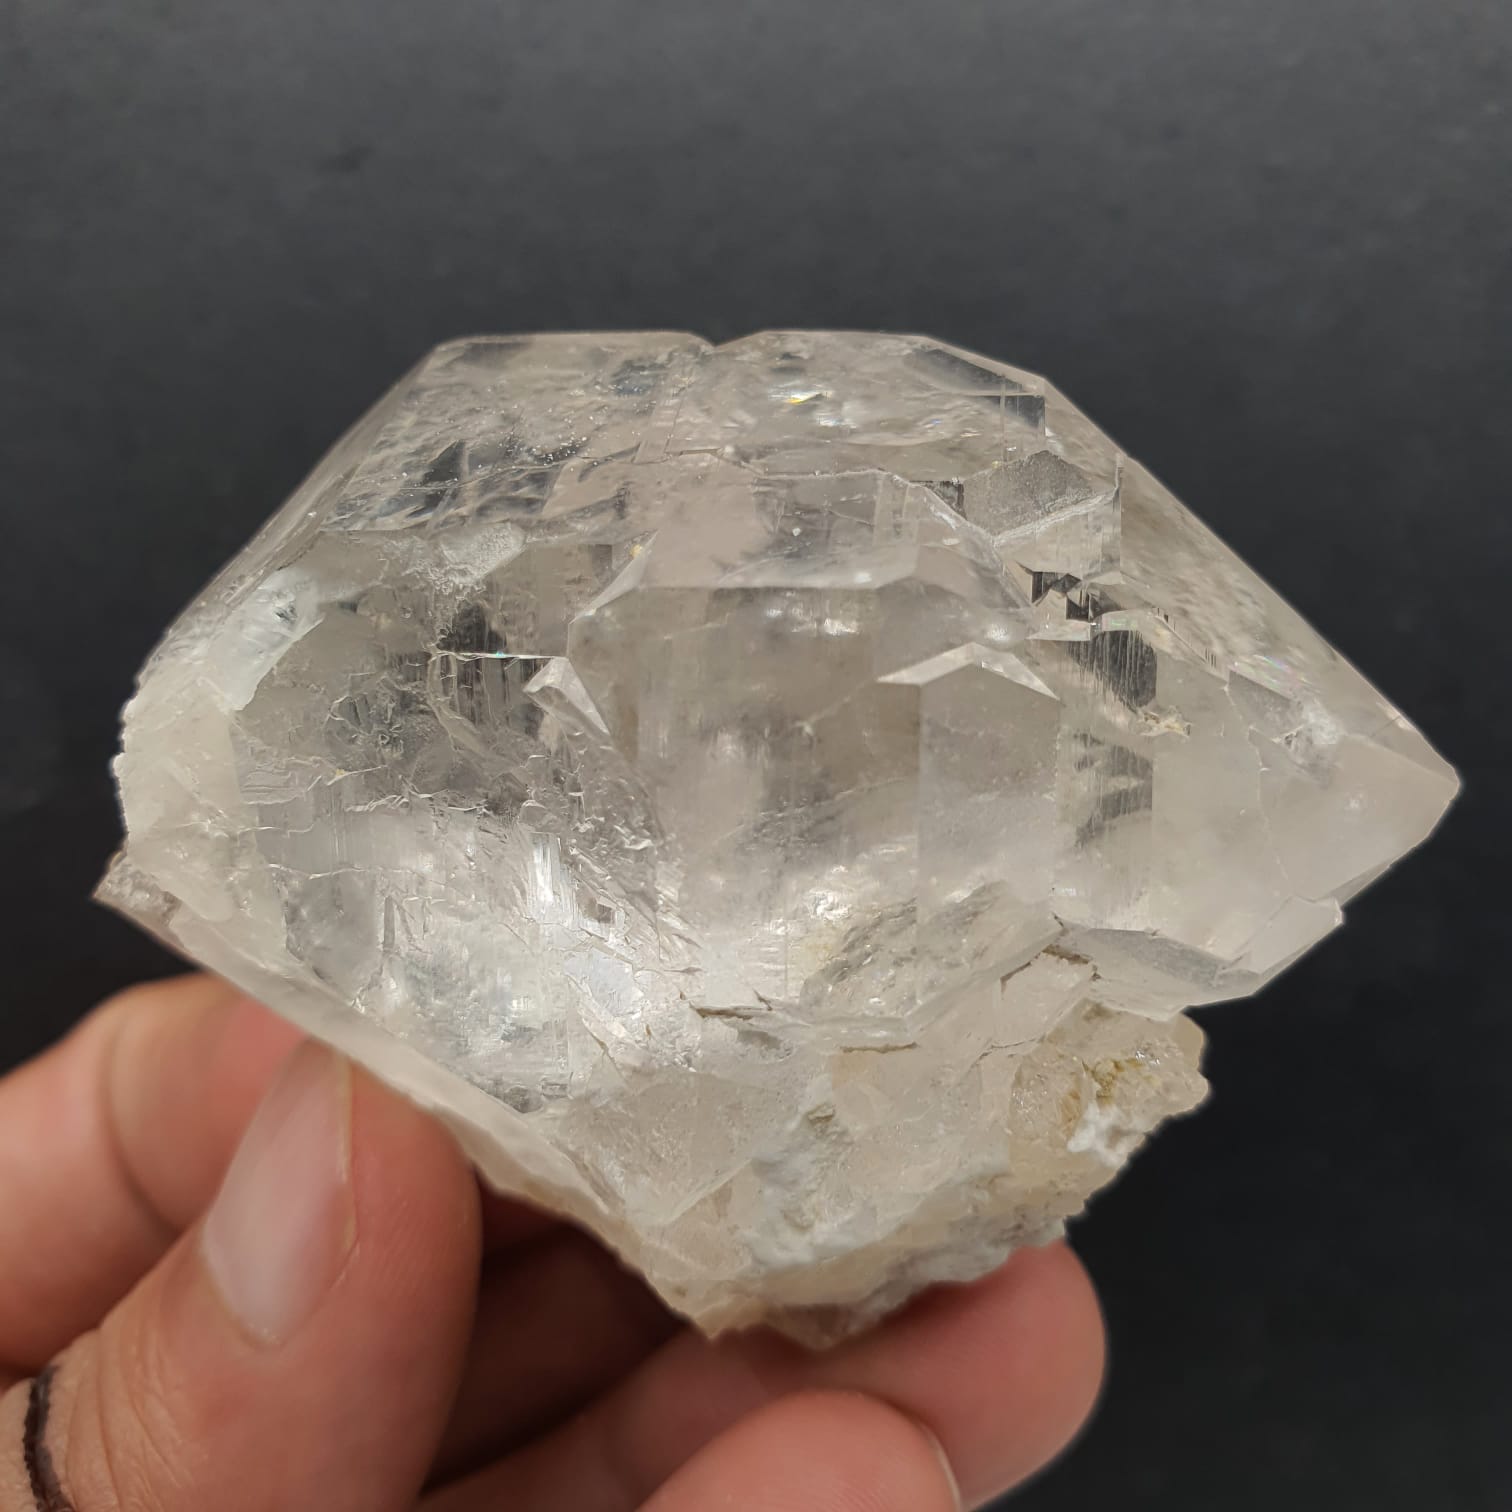 Beautiful Double Terminated Quartz With Excellent Transparency